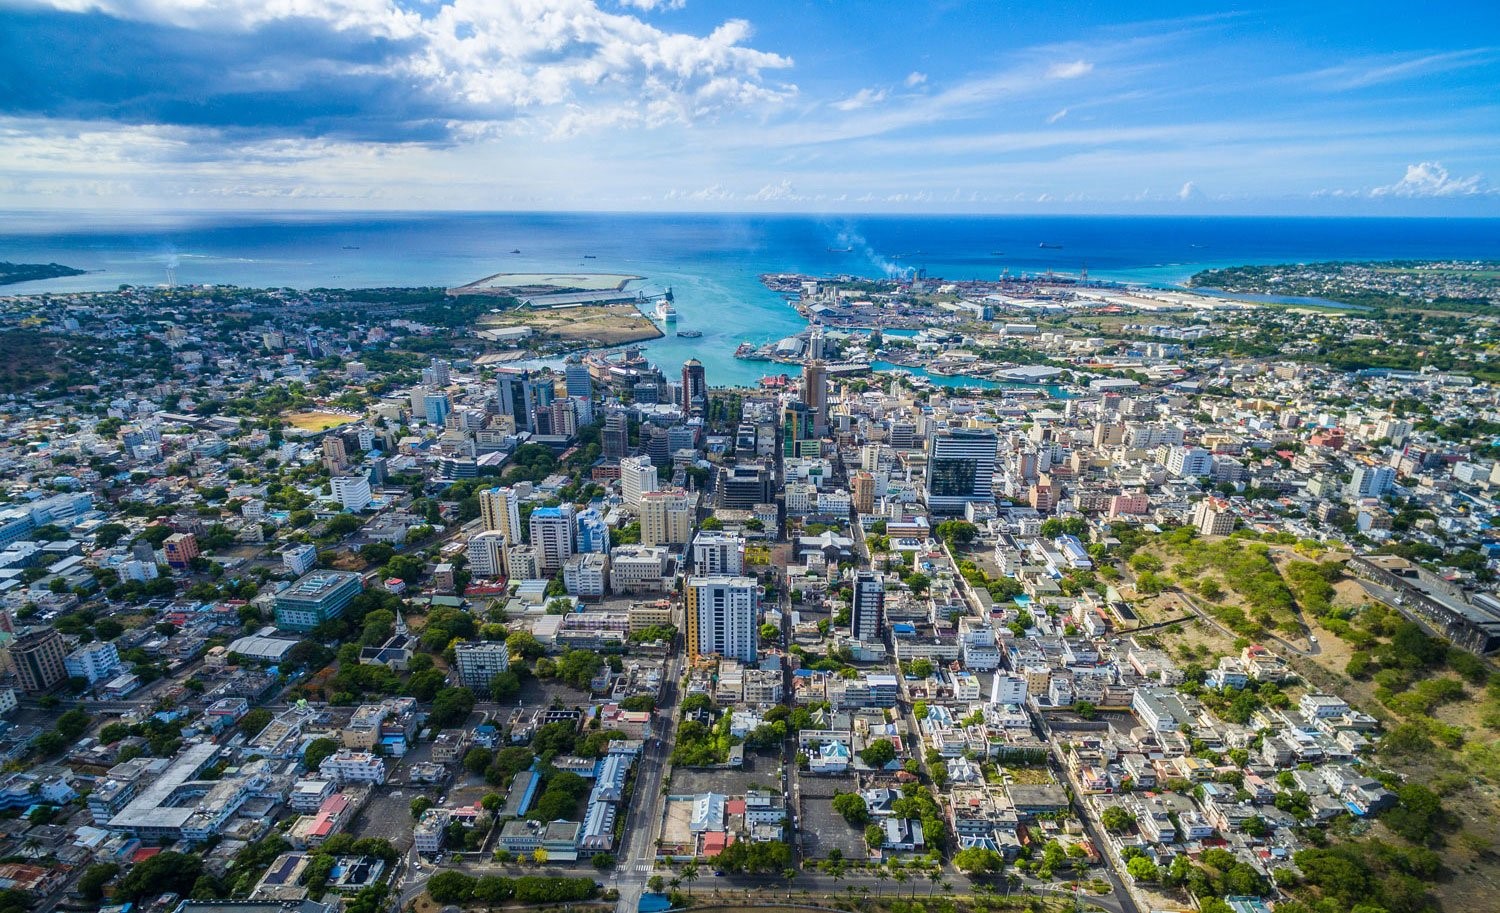 Mauritius Expansion: The Ascent Group Gains Regulatory Approval from the FSC (Mauritius)